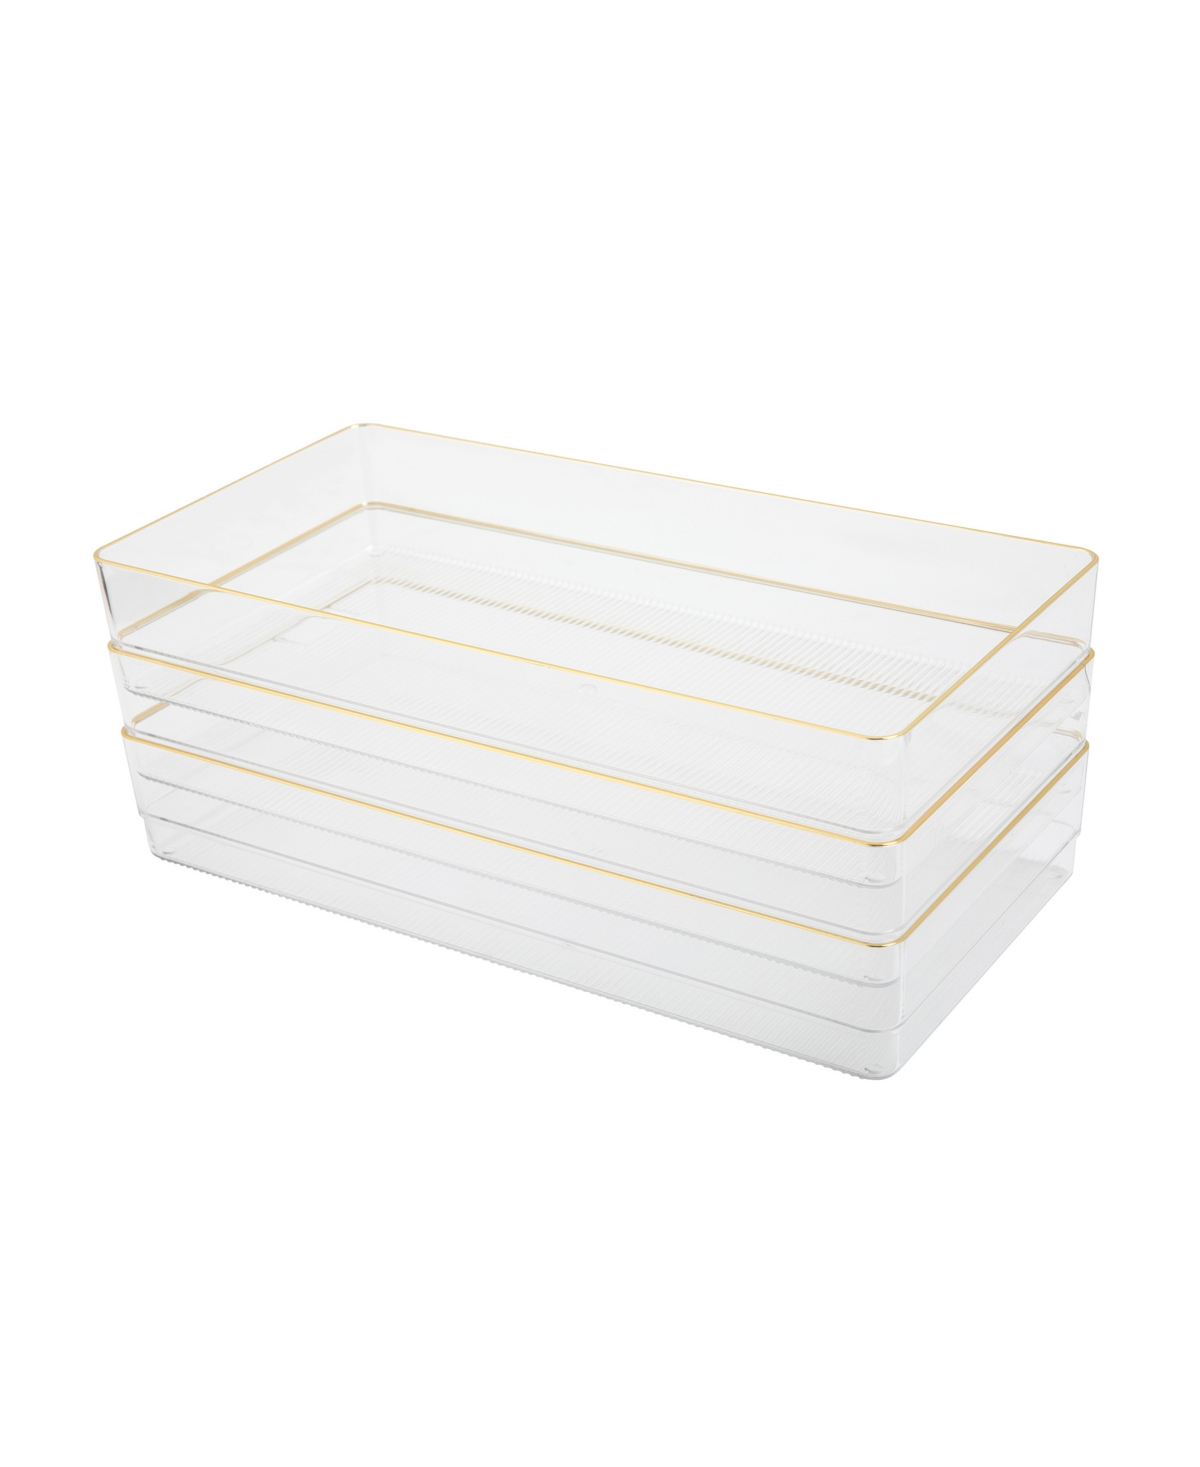 Kerry 3 Piece Plastic Stackable Office Desk Drawer Organizers, 12" x 6" - Clear, Gold Trim